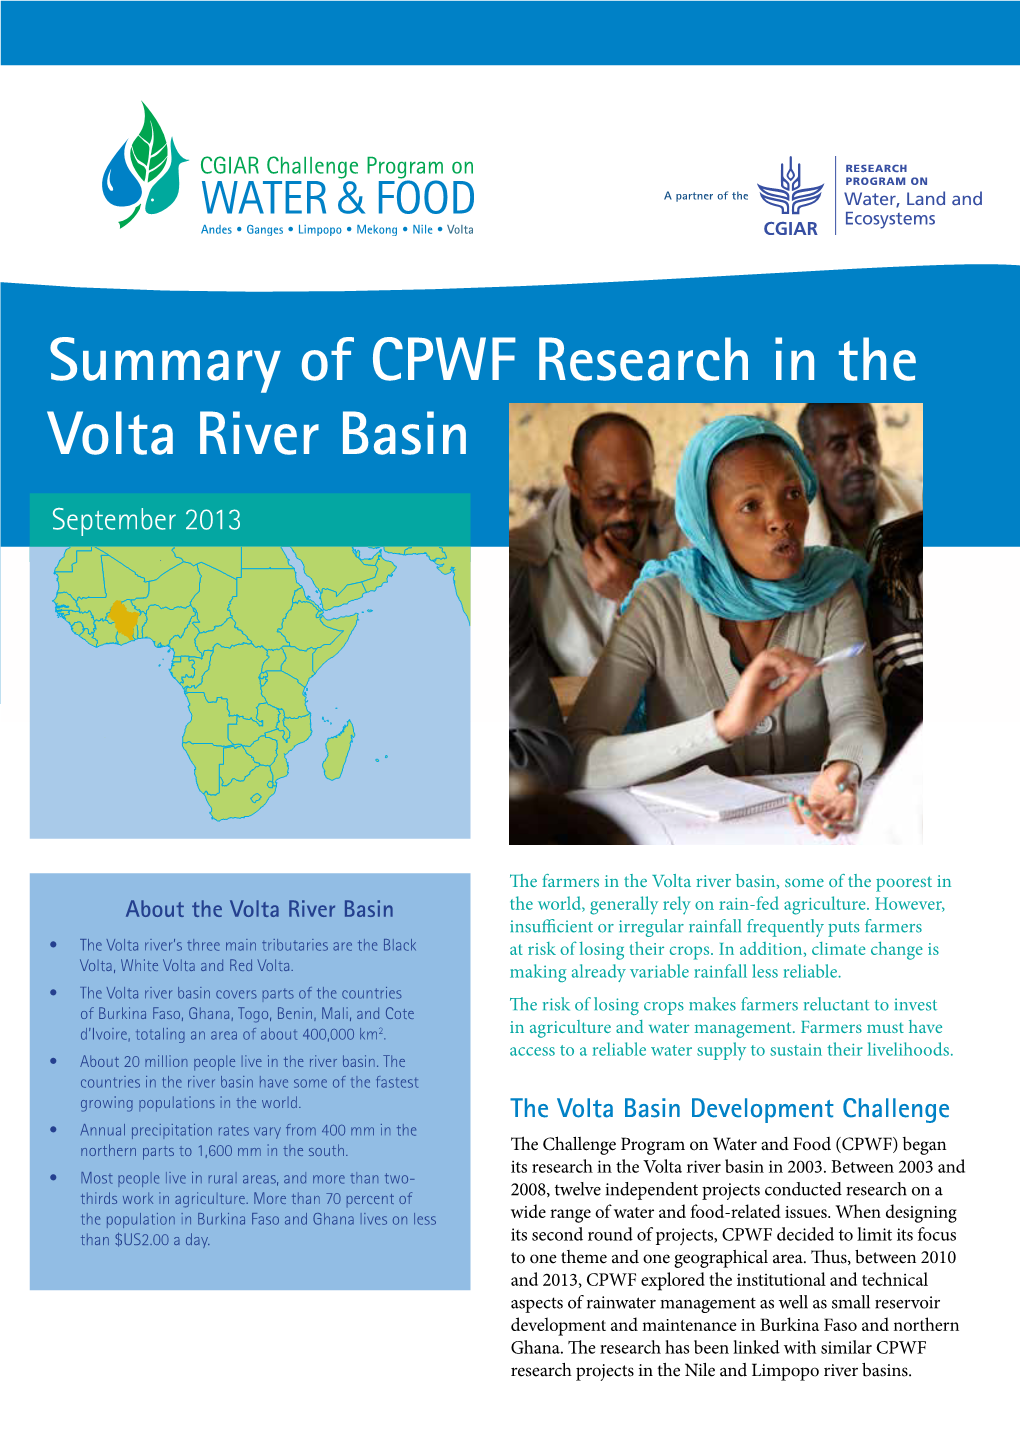 Summary of CPWF Research in the Volta River Basin